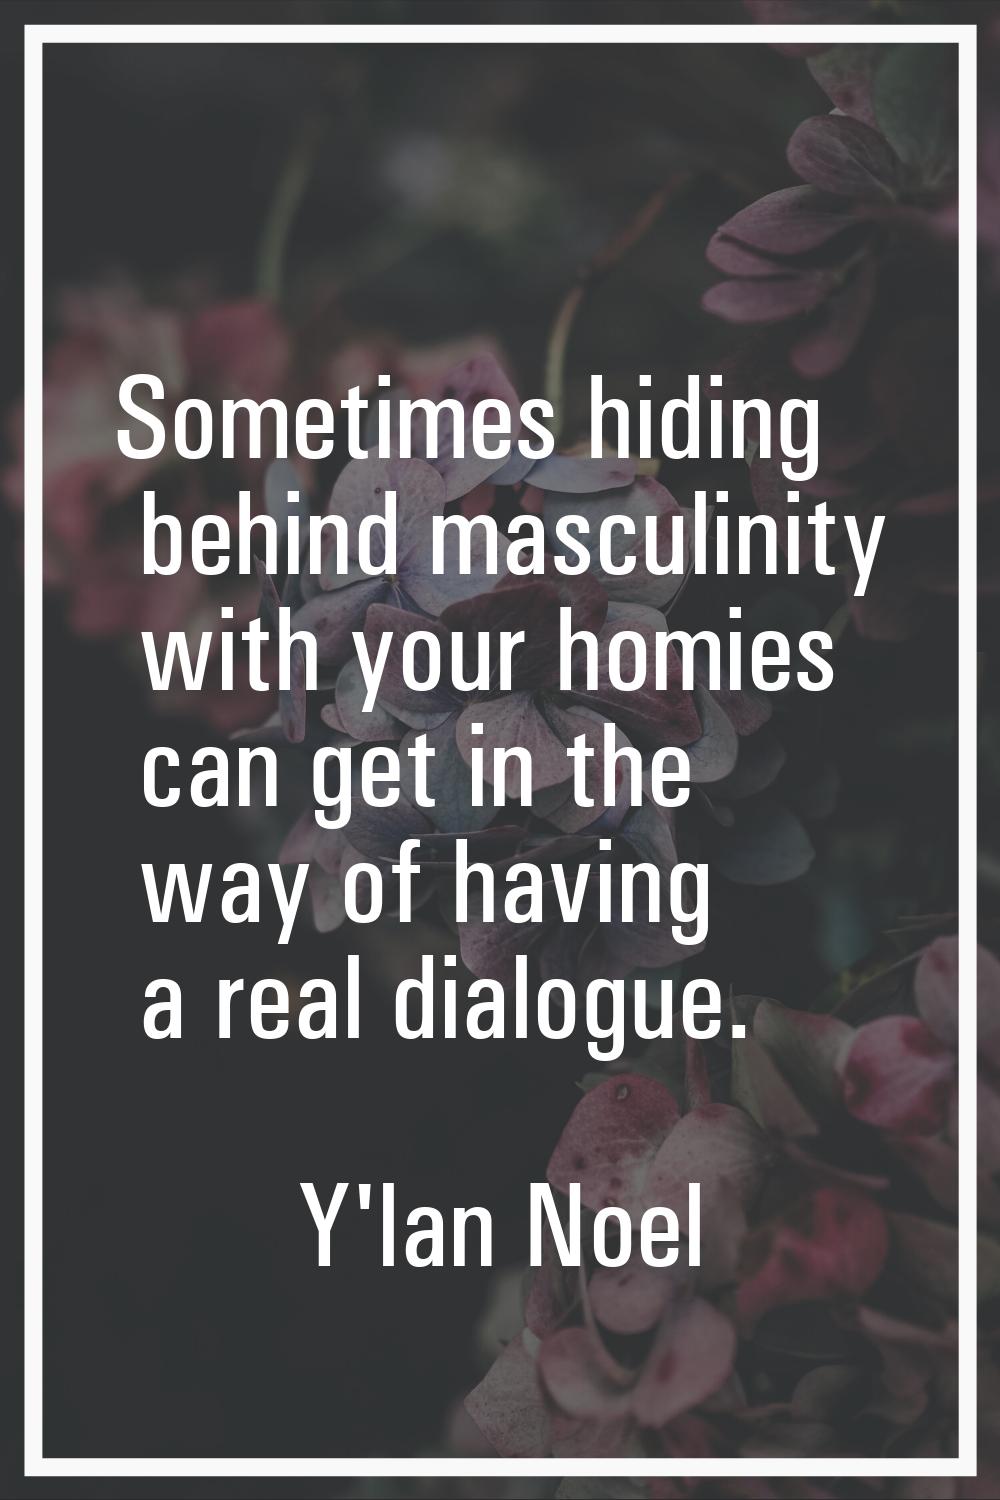 Sometimes hiding behind masculinity with your homies can get in the way of having a real dialogue.